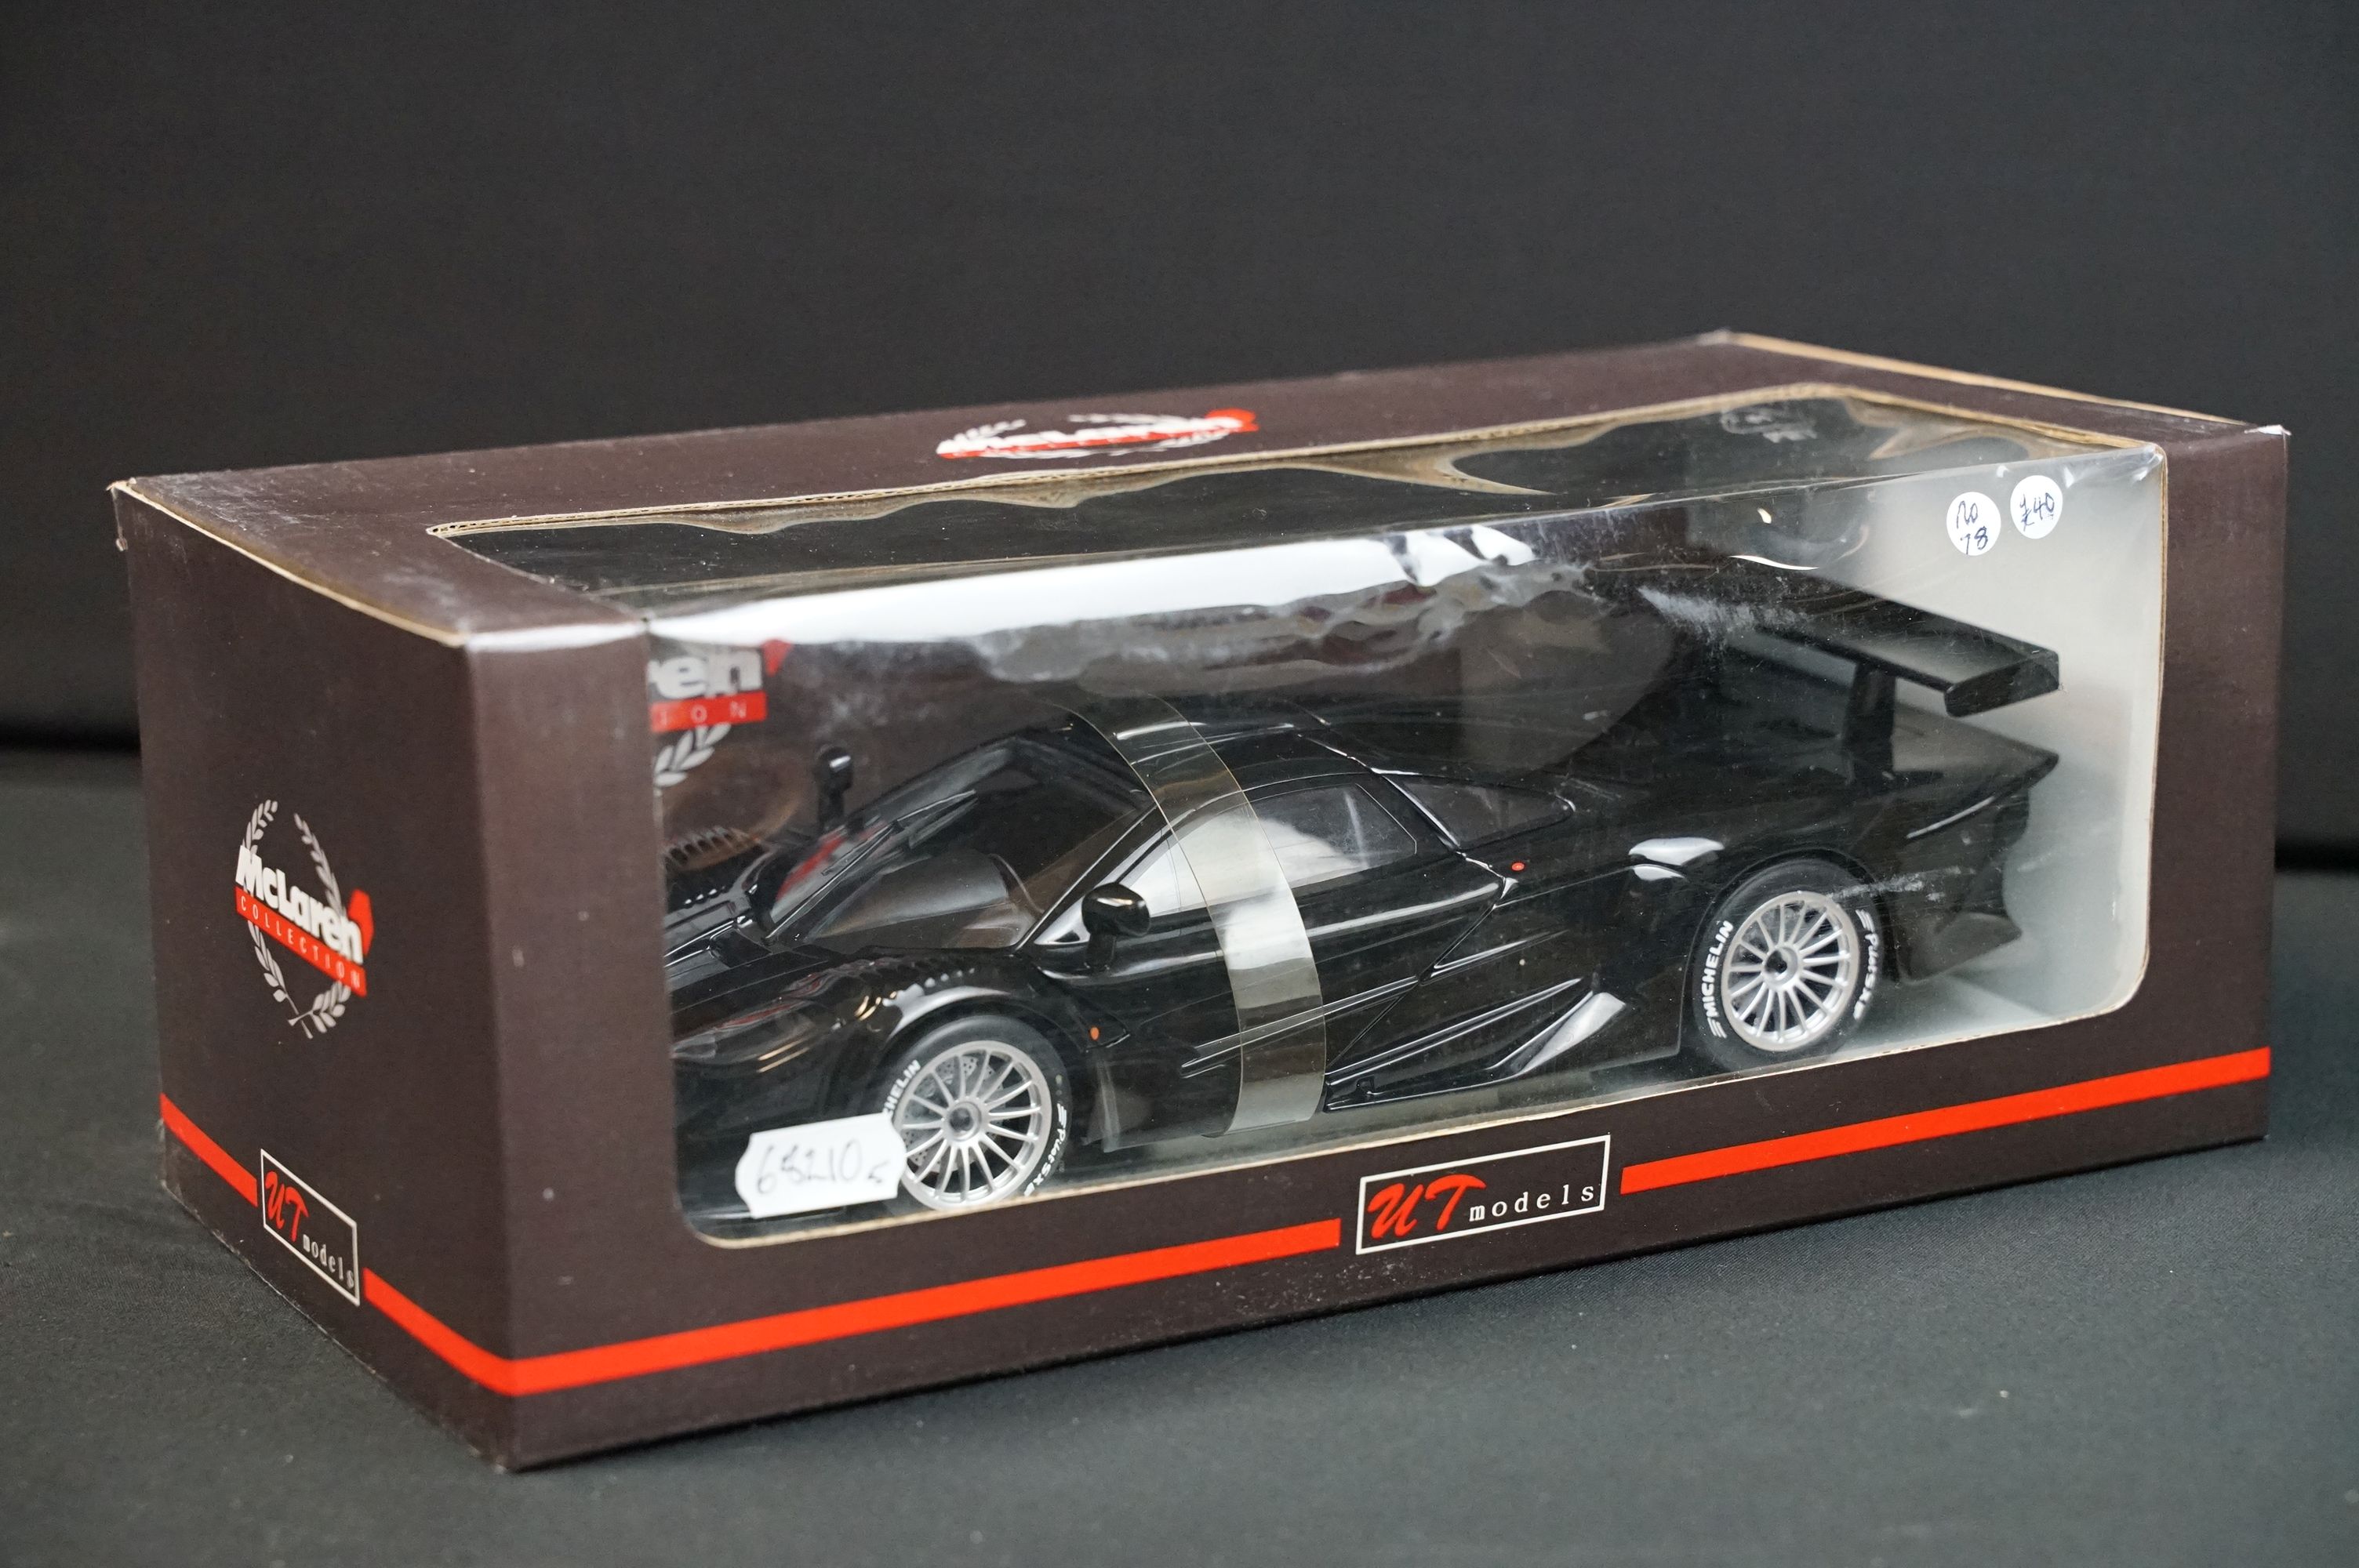 Five boxed 1/18 scale diecast models to include 4 x UT Models featuring Chevrolet Corvette, - Image 11 of 11